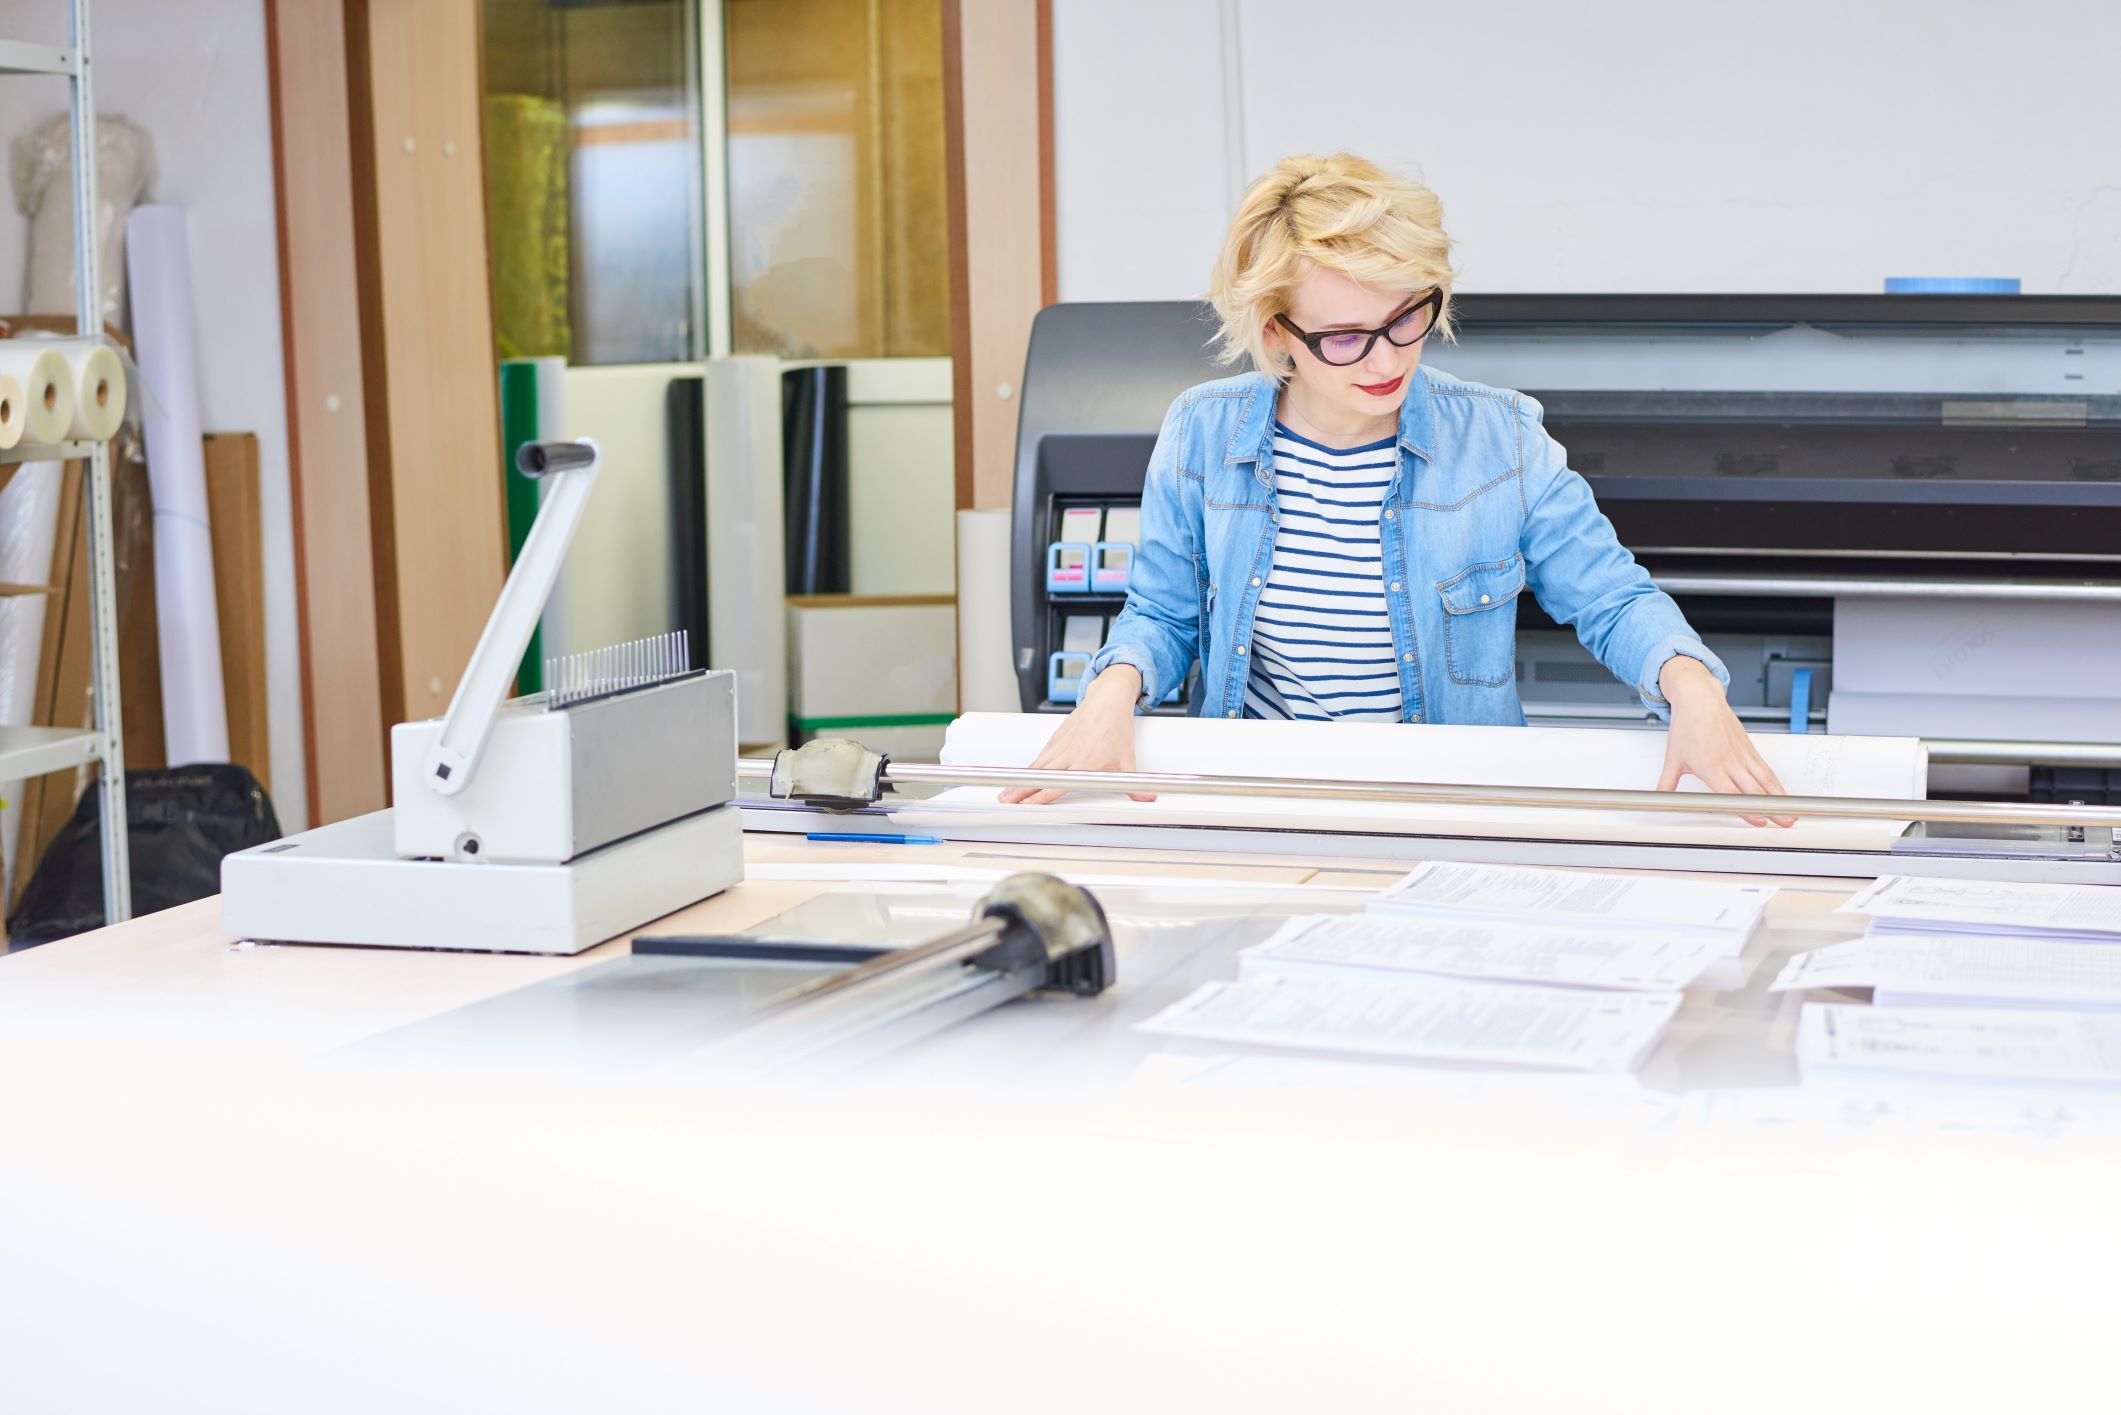 A focused woman with blonde hair and wearing glasses is working in a print shop, standing behind a wide format printer. She is aligning a large sheet of paper on the cutter in a bright, busy office environment, with various printing supplies and equipment around her.